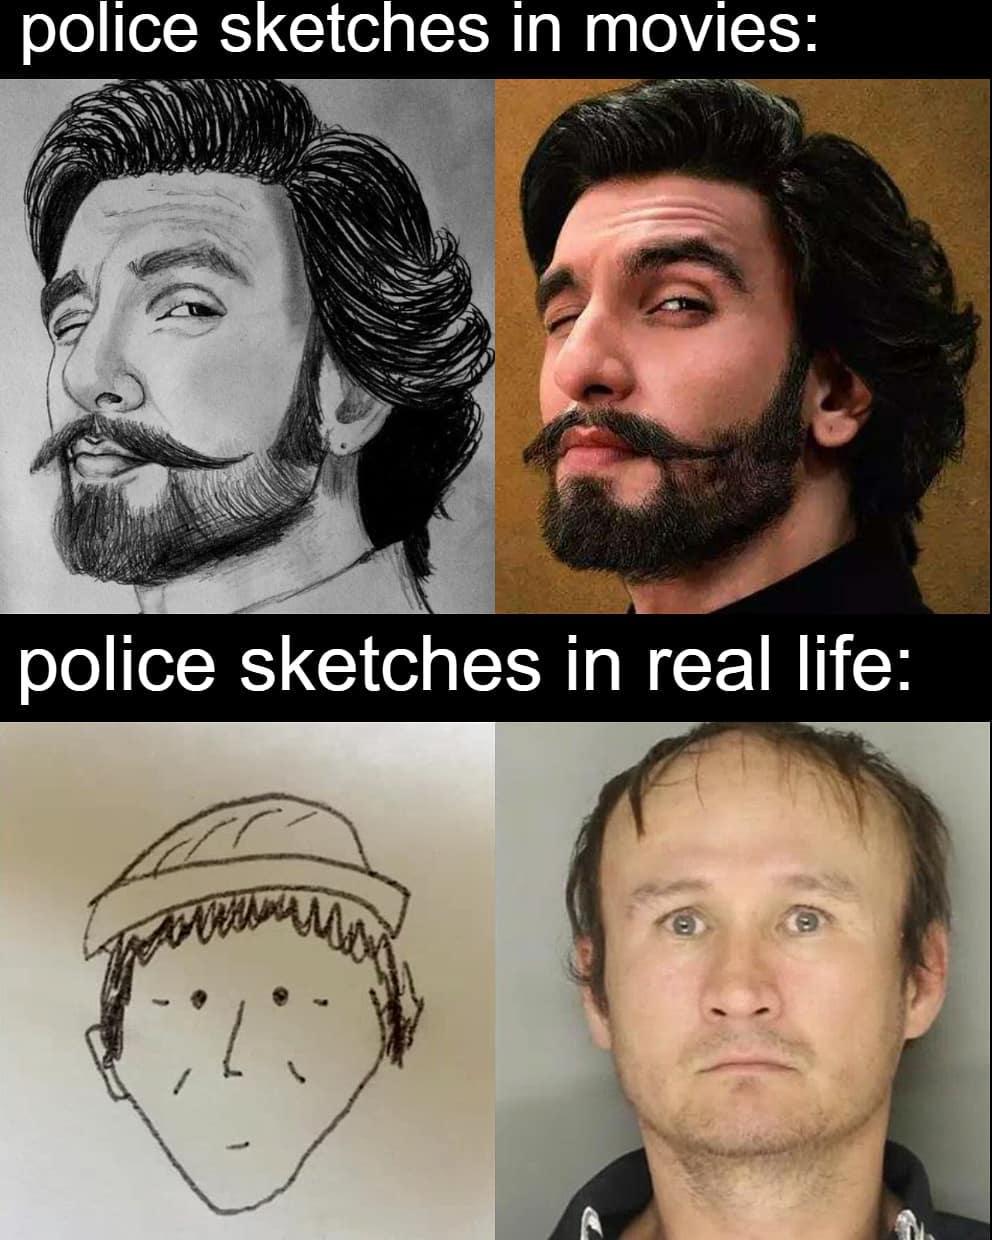 Police sketches in movies: Police sketches in real life: